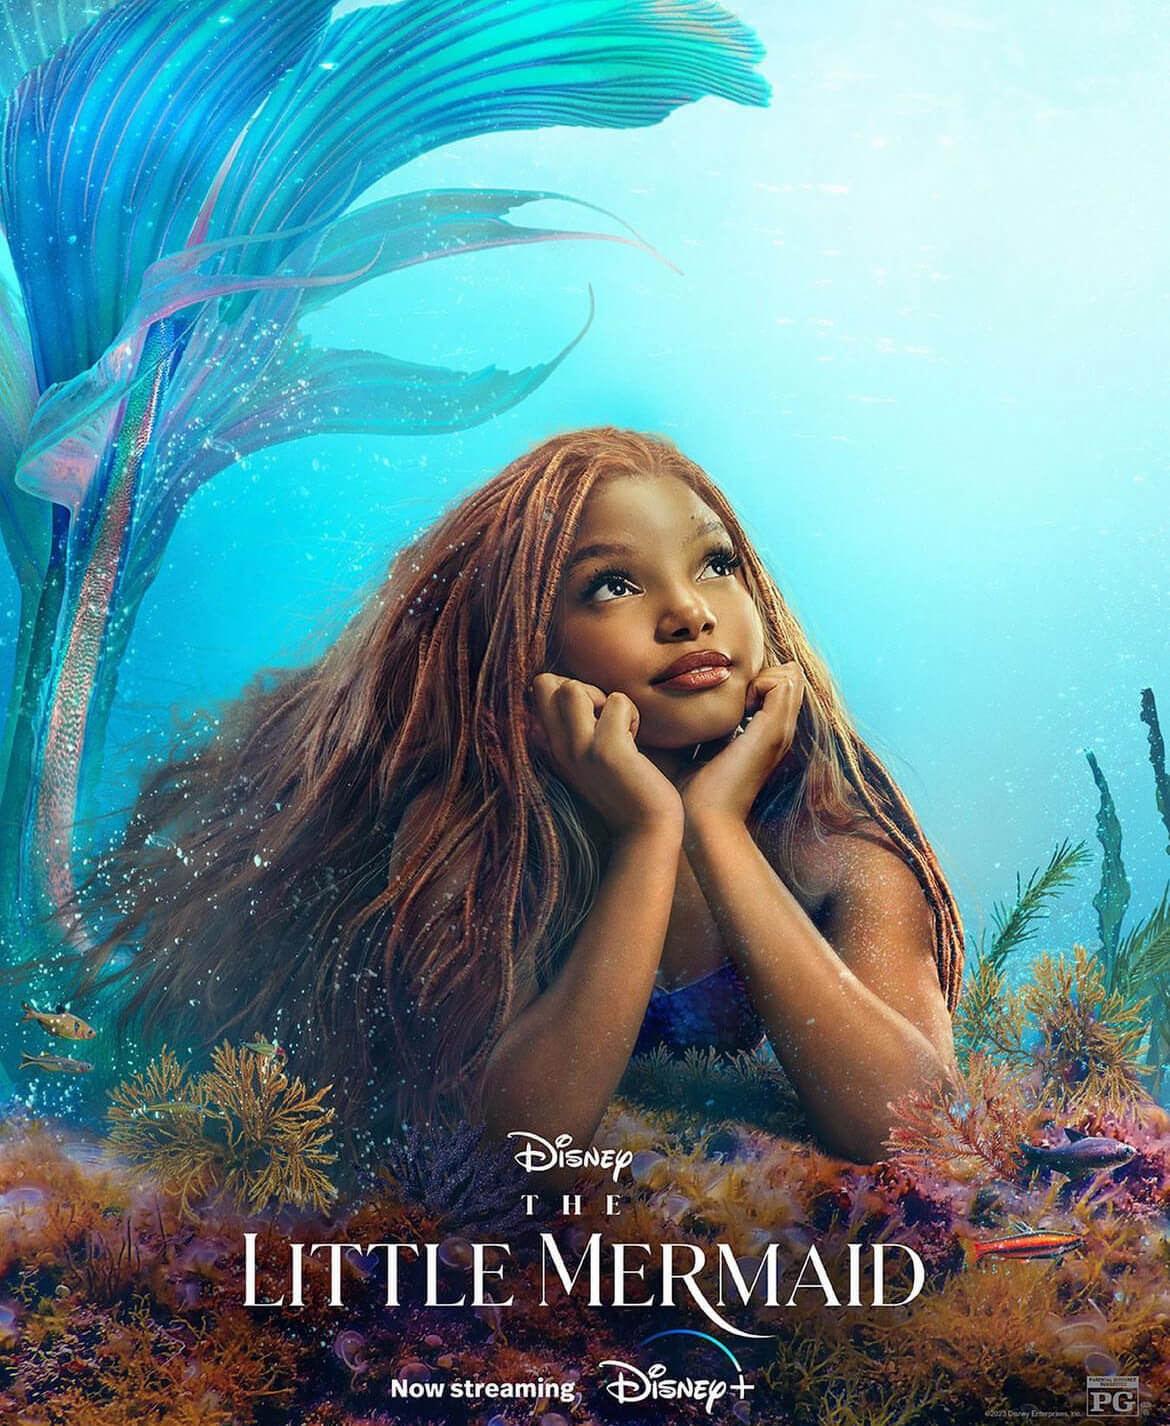 Disney went all out with a live-action remake of The Little Mermaid. 